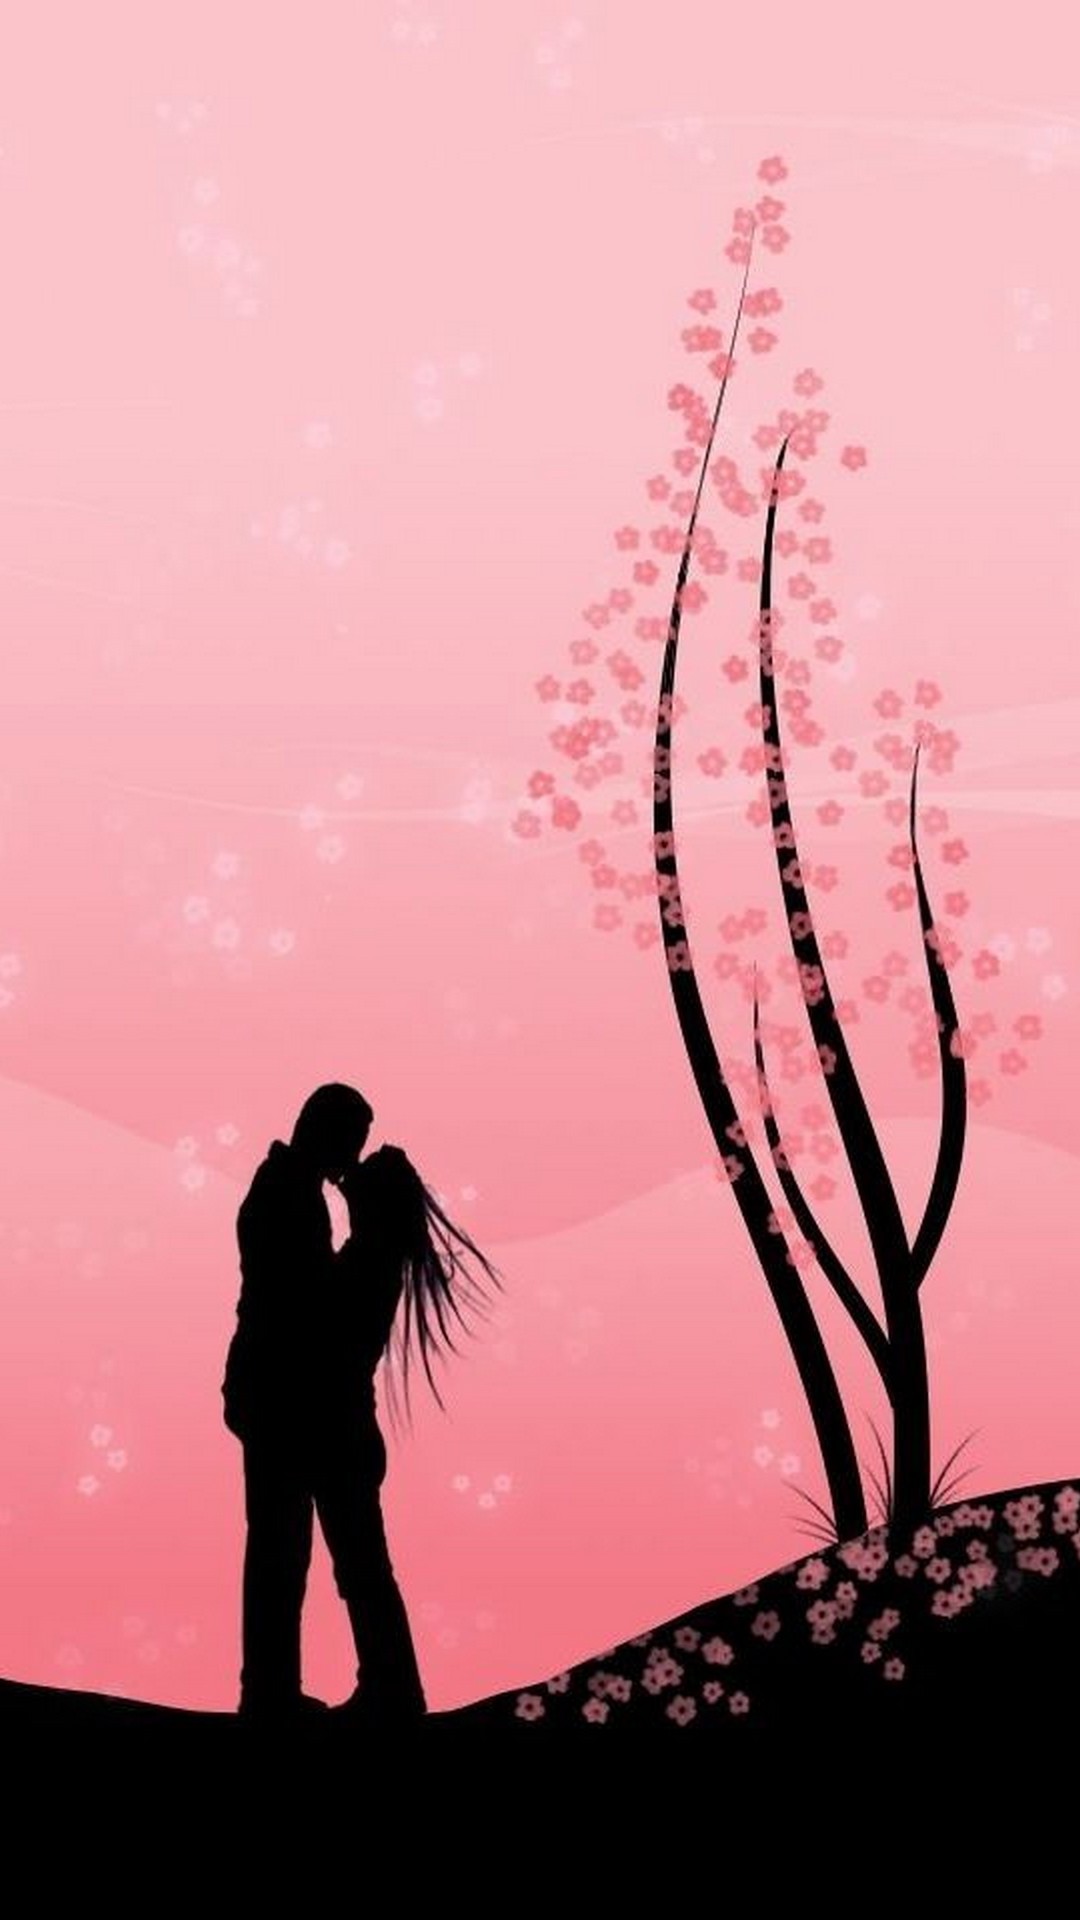 Android Wallpaper Couple Animated With Hd Resolution - Best Wallpapers Of Couple  Animated - 1080x1920 Wallpaper 